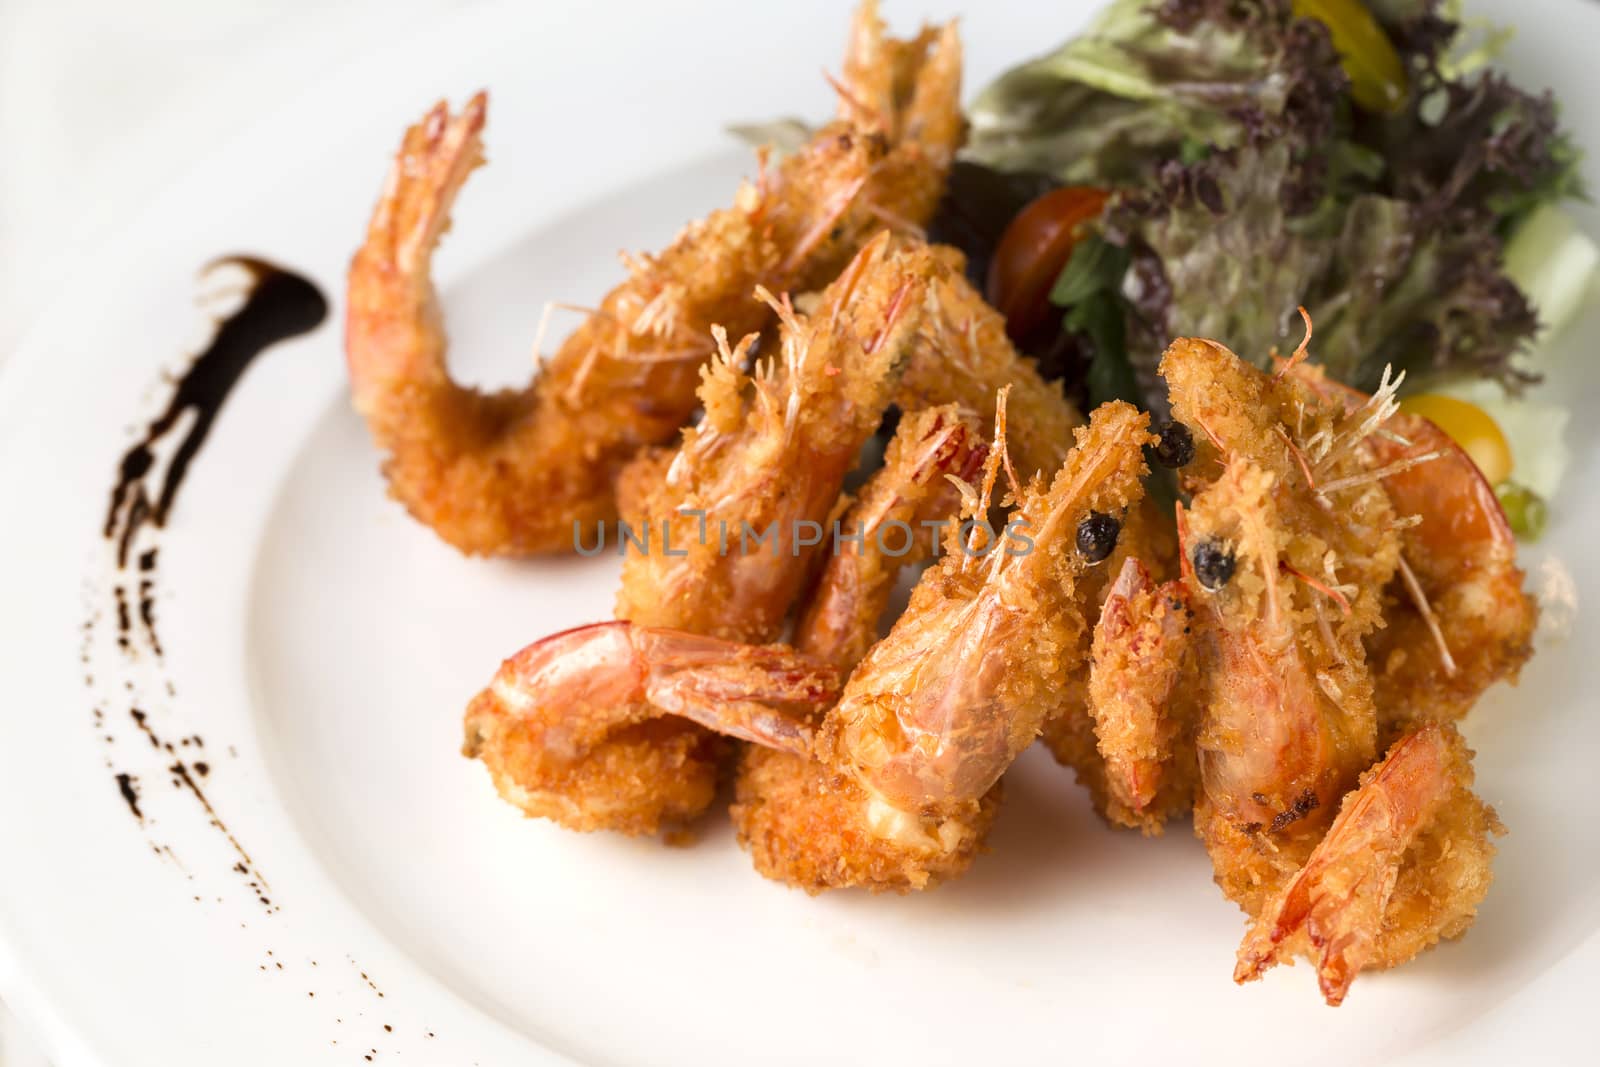 A close up plate of deep fried Prawns ready to be served.